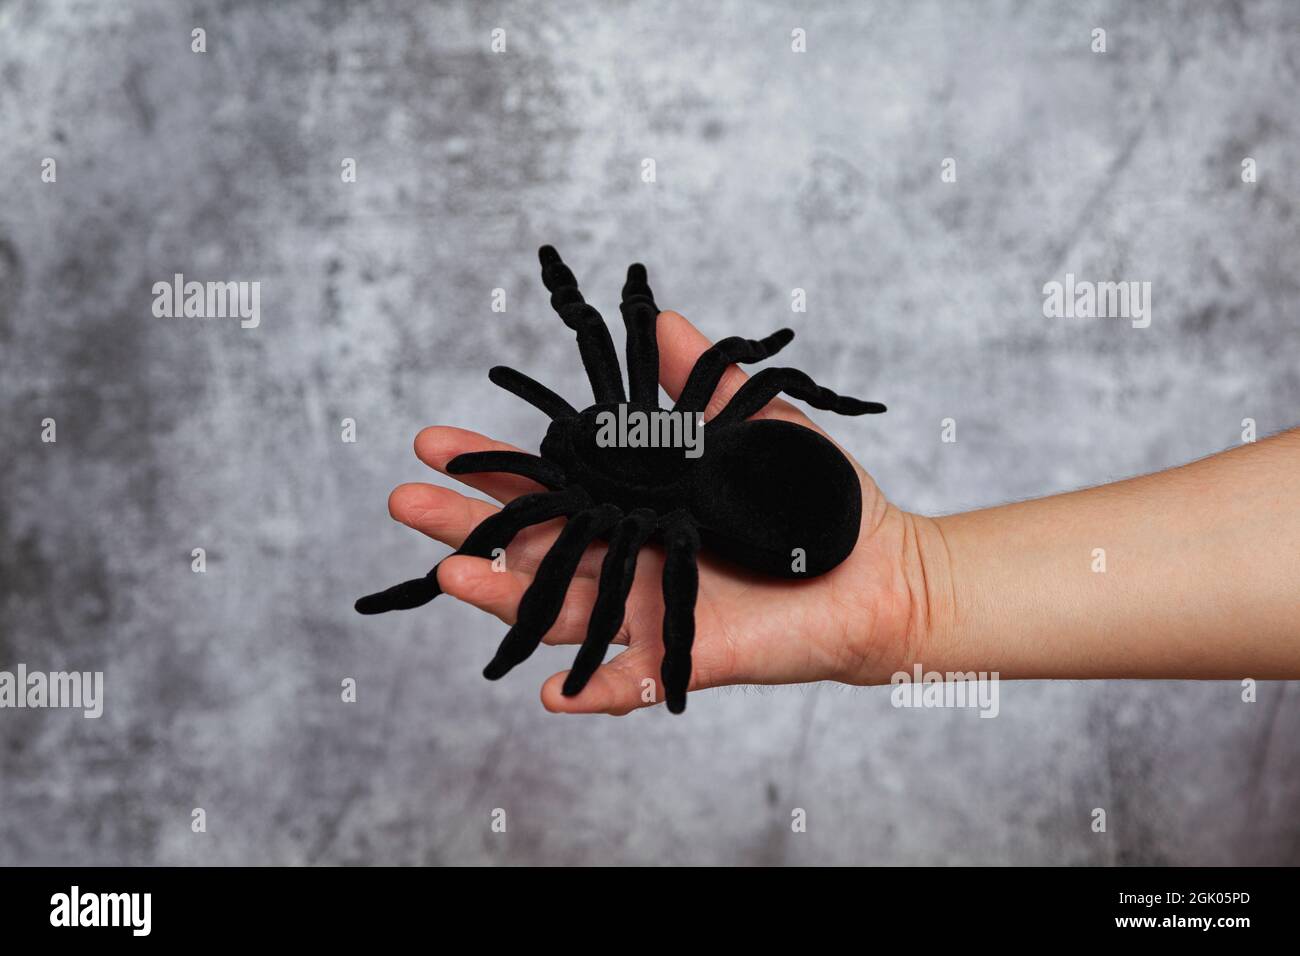 A man's right hand holding a large black toy spider on a textured gray background. Stock Photo